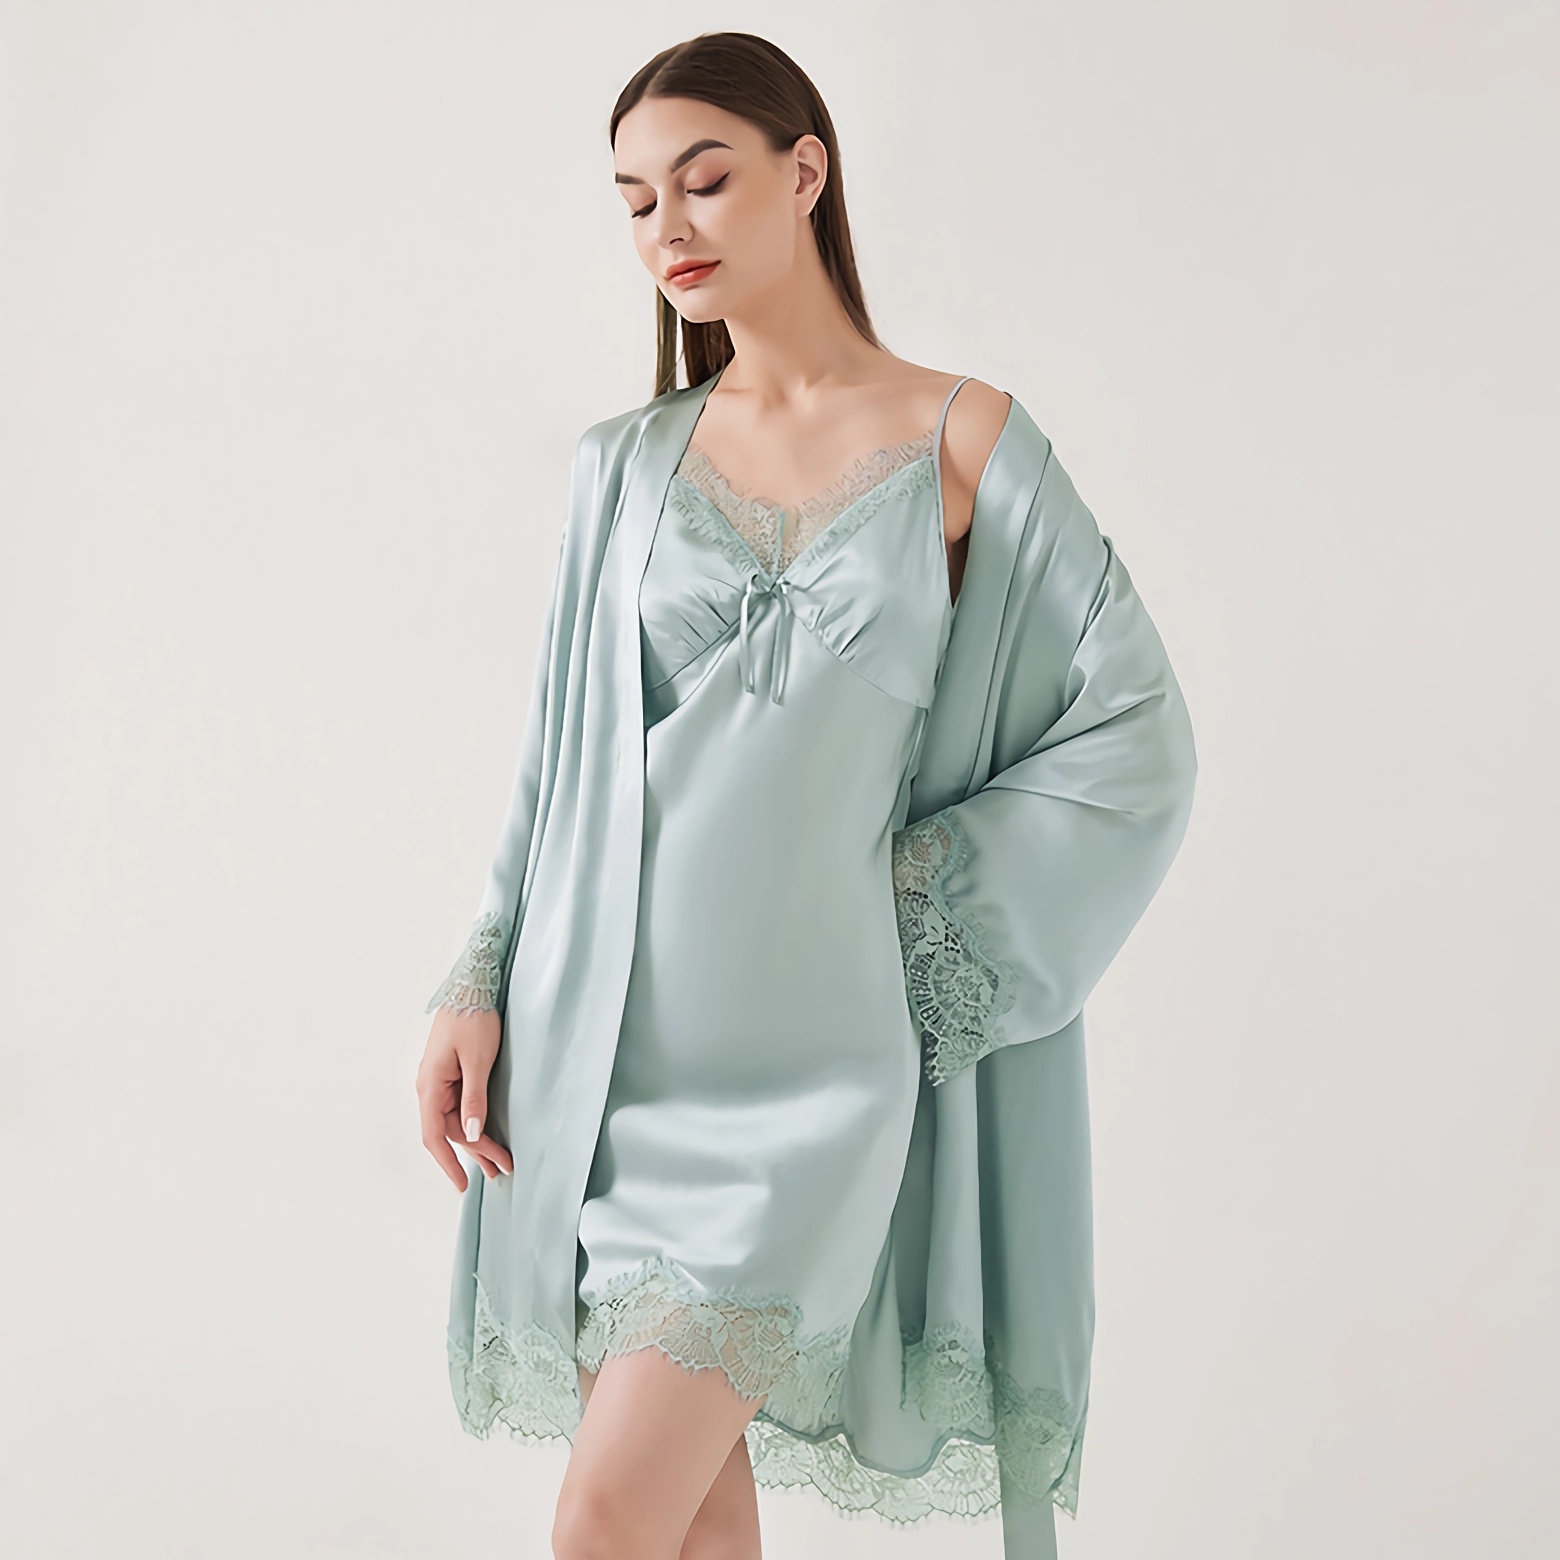 Women's Silk Nightgown And Robe Set Lace REAL SILK LIFE